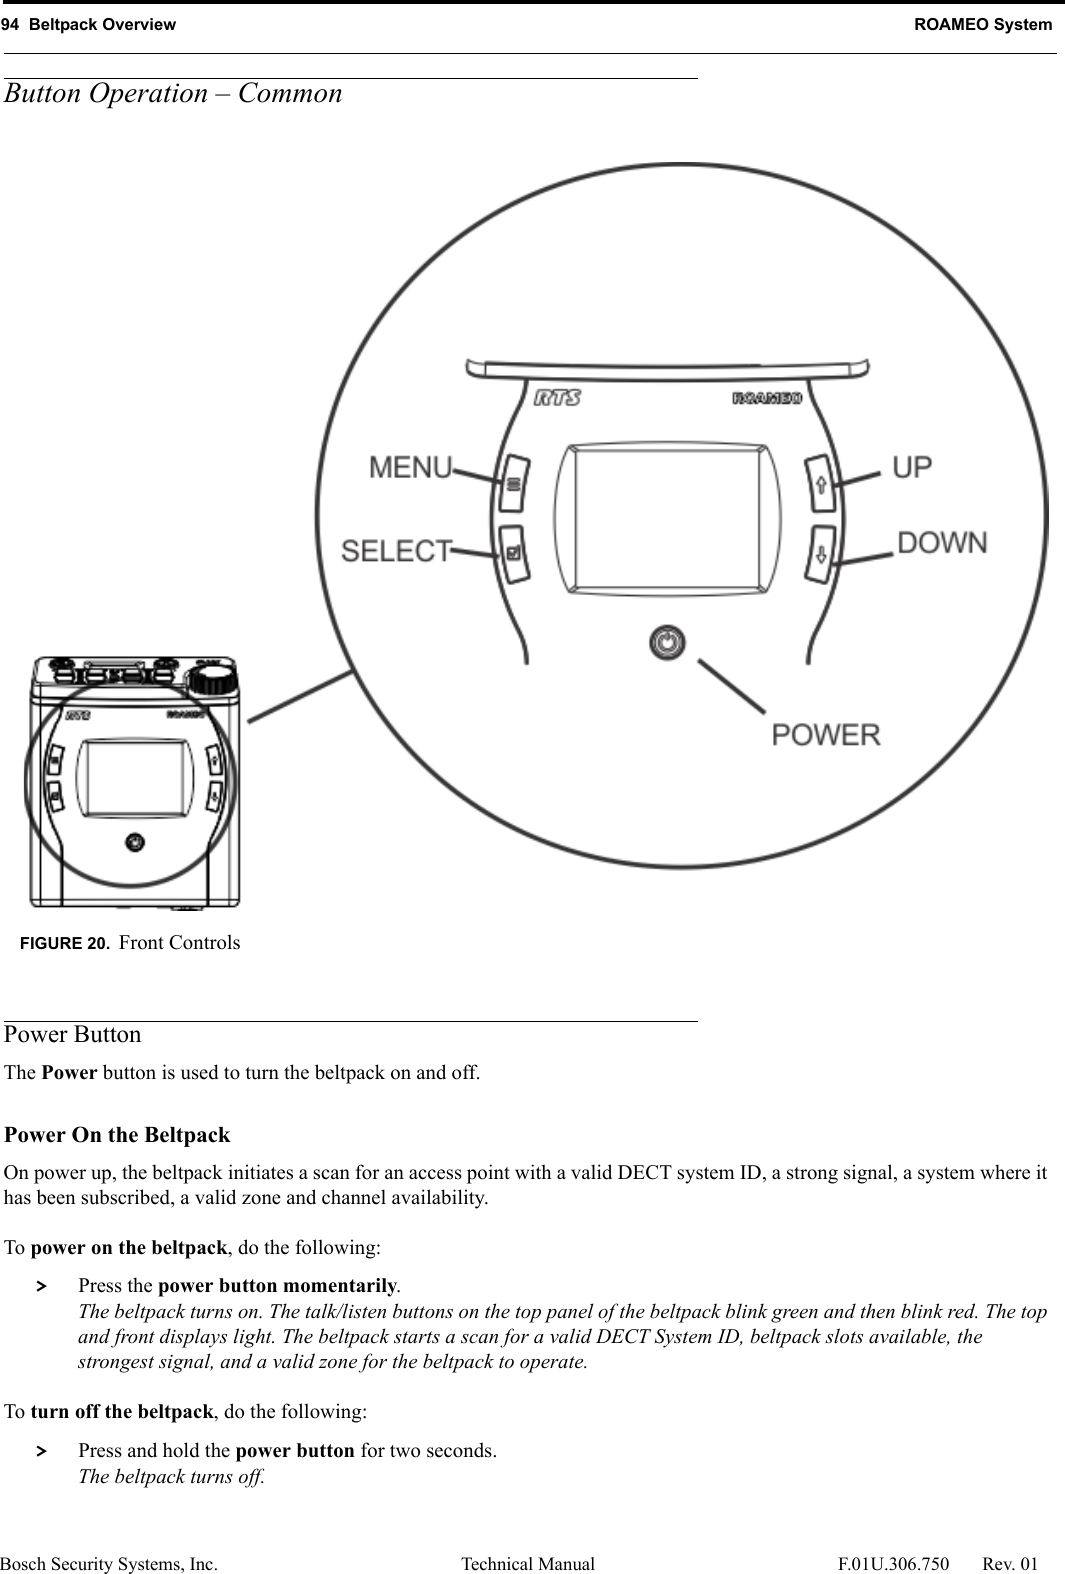 94  Beltpack Overview ROAMEO SystemBosch Security Systems, Inc. Technical Manual  F.01U.306.750 Rev. 01Button Operation – CommonPower ButtonThe Power button is used to turn the beltpack on and off. Power On the Beltpack On power up, the beltpack initiates a scan for an access point with a valid DECT system ID, a strong signal, a system where it has been subscribed, a valid zone and channel availability. To power on the beltpack, do the following: &gt; Press the power button momentarily.The beltpack turns on. The talk/listen buttons on the top panel of the beltpack blink green and then blink red. The top and front displays light. The beltpack starts a scan for a valid DECT System ID, beltpack slots available, the strongest signal, and a valid zone for the beltpack to operate. To turn off the beltpack, do the following: &gt; Press and hold the power button for two seconds.The beltpack turns off.FIGURE 20. Front Controls